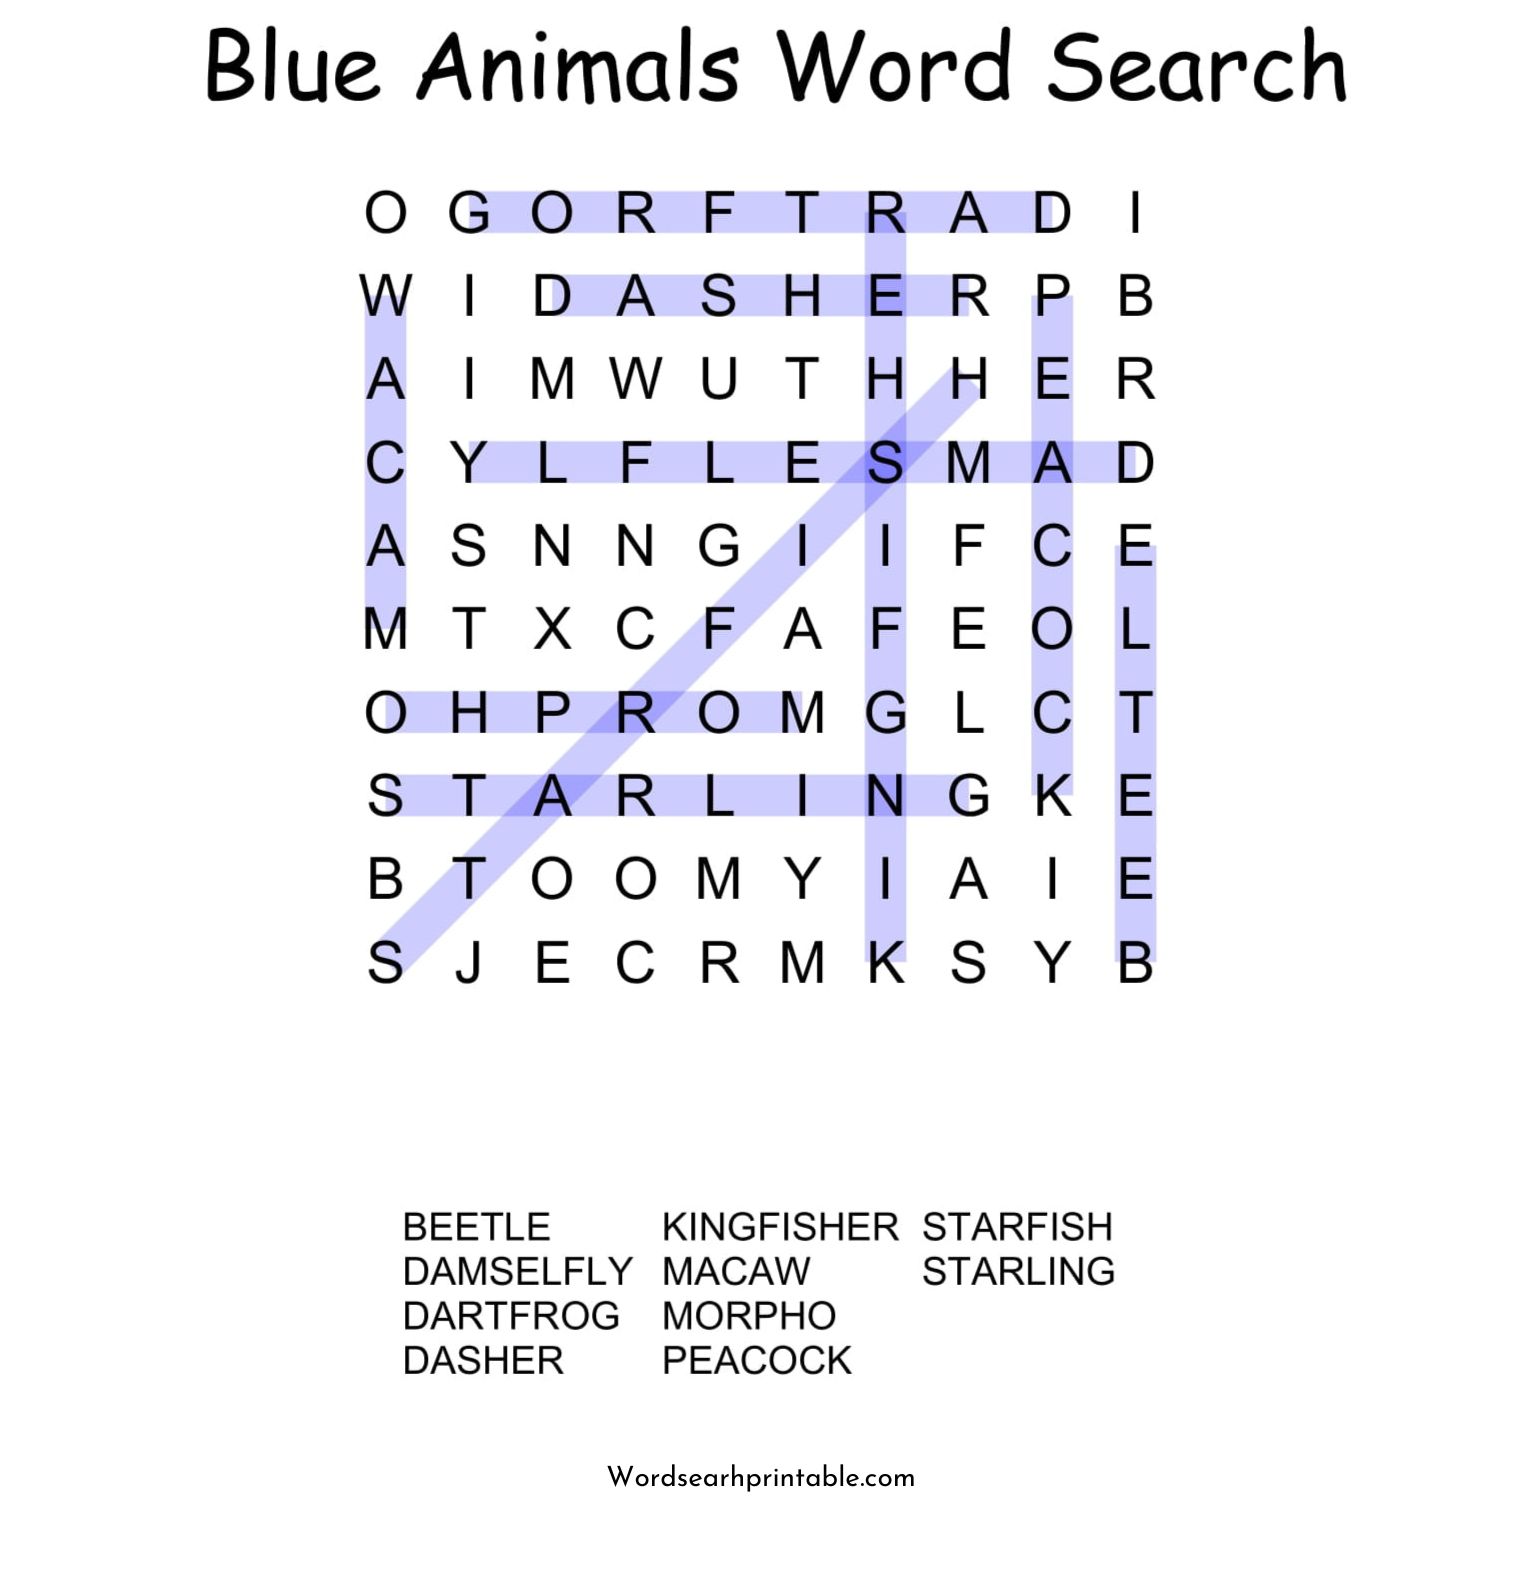 blue animals word search puzzle solution